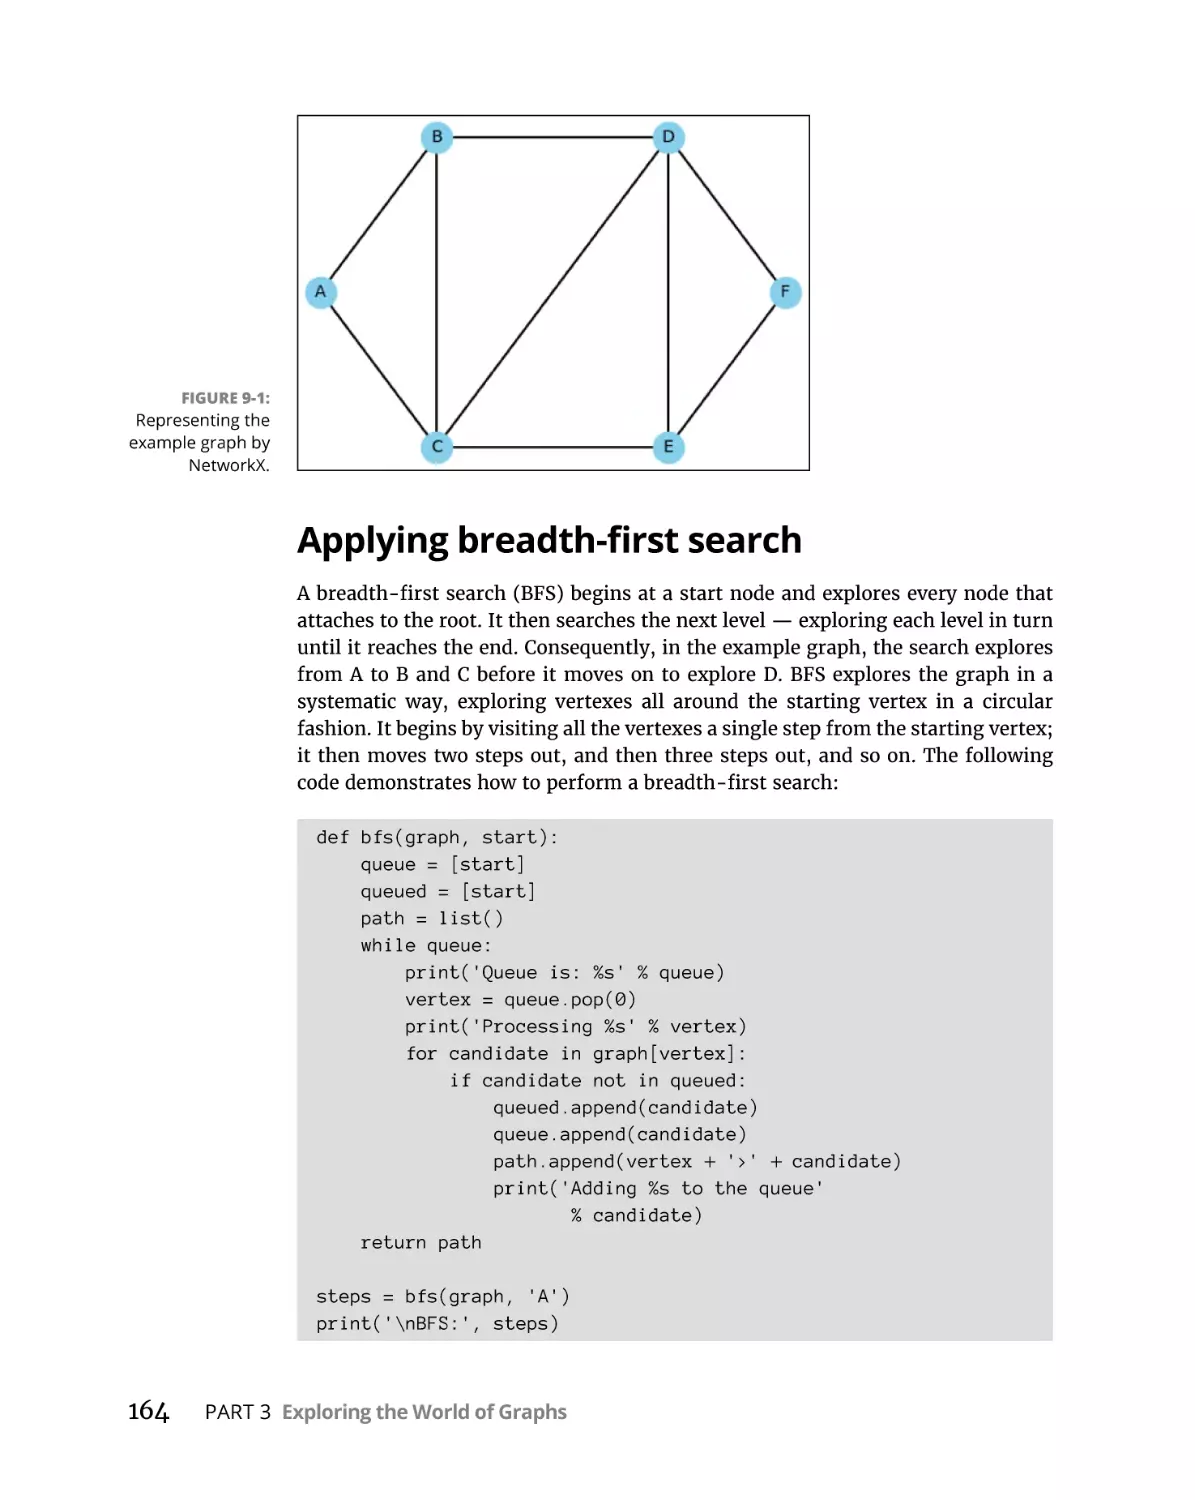 Applying breadth-first search